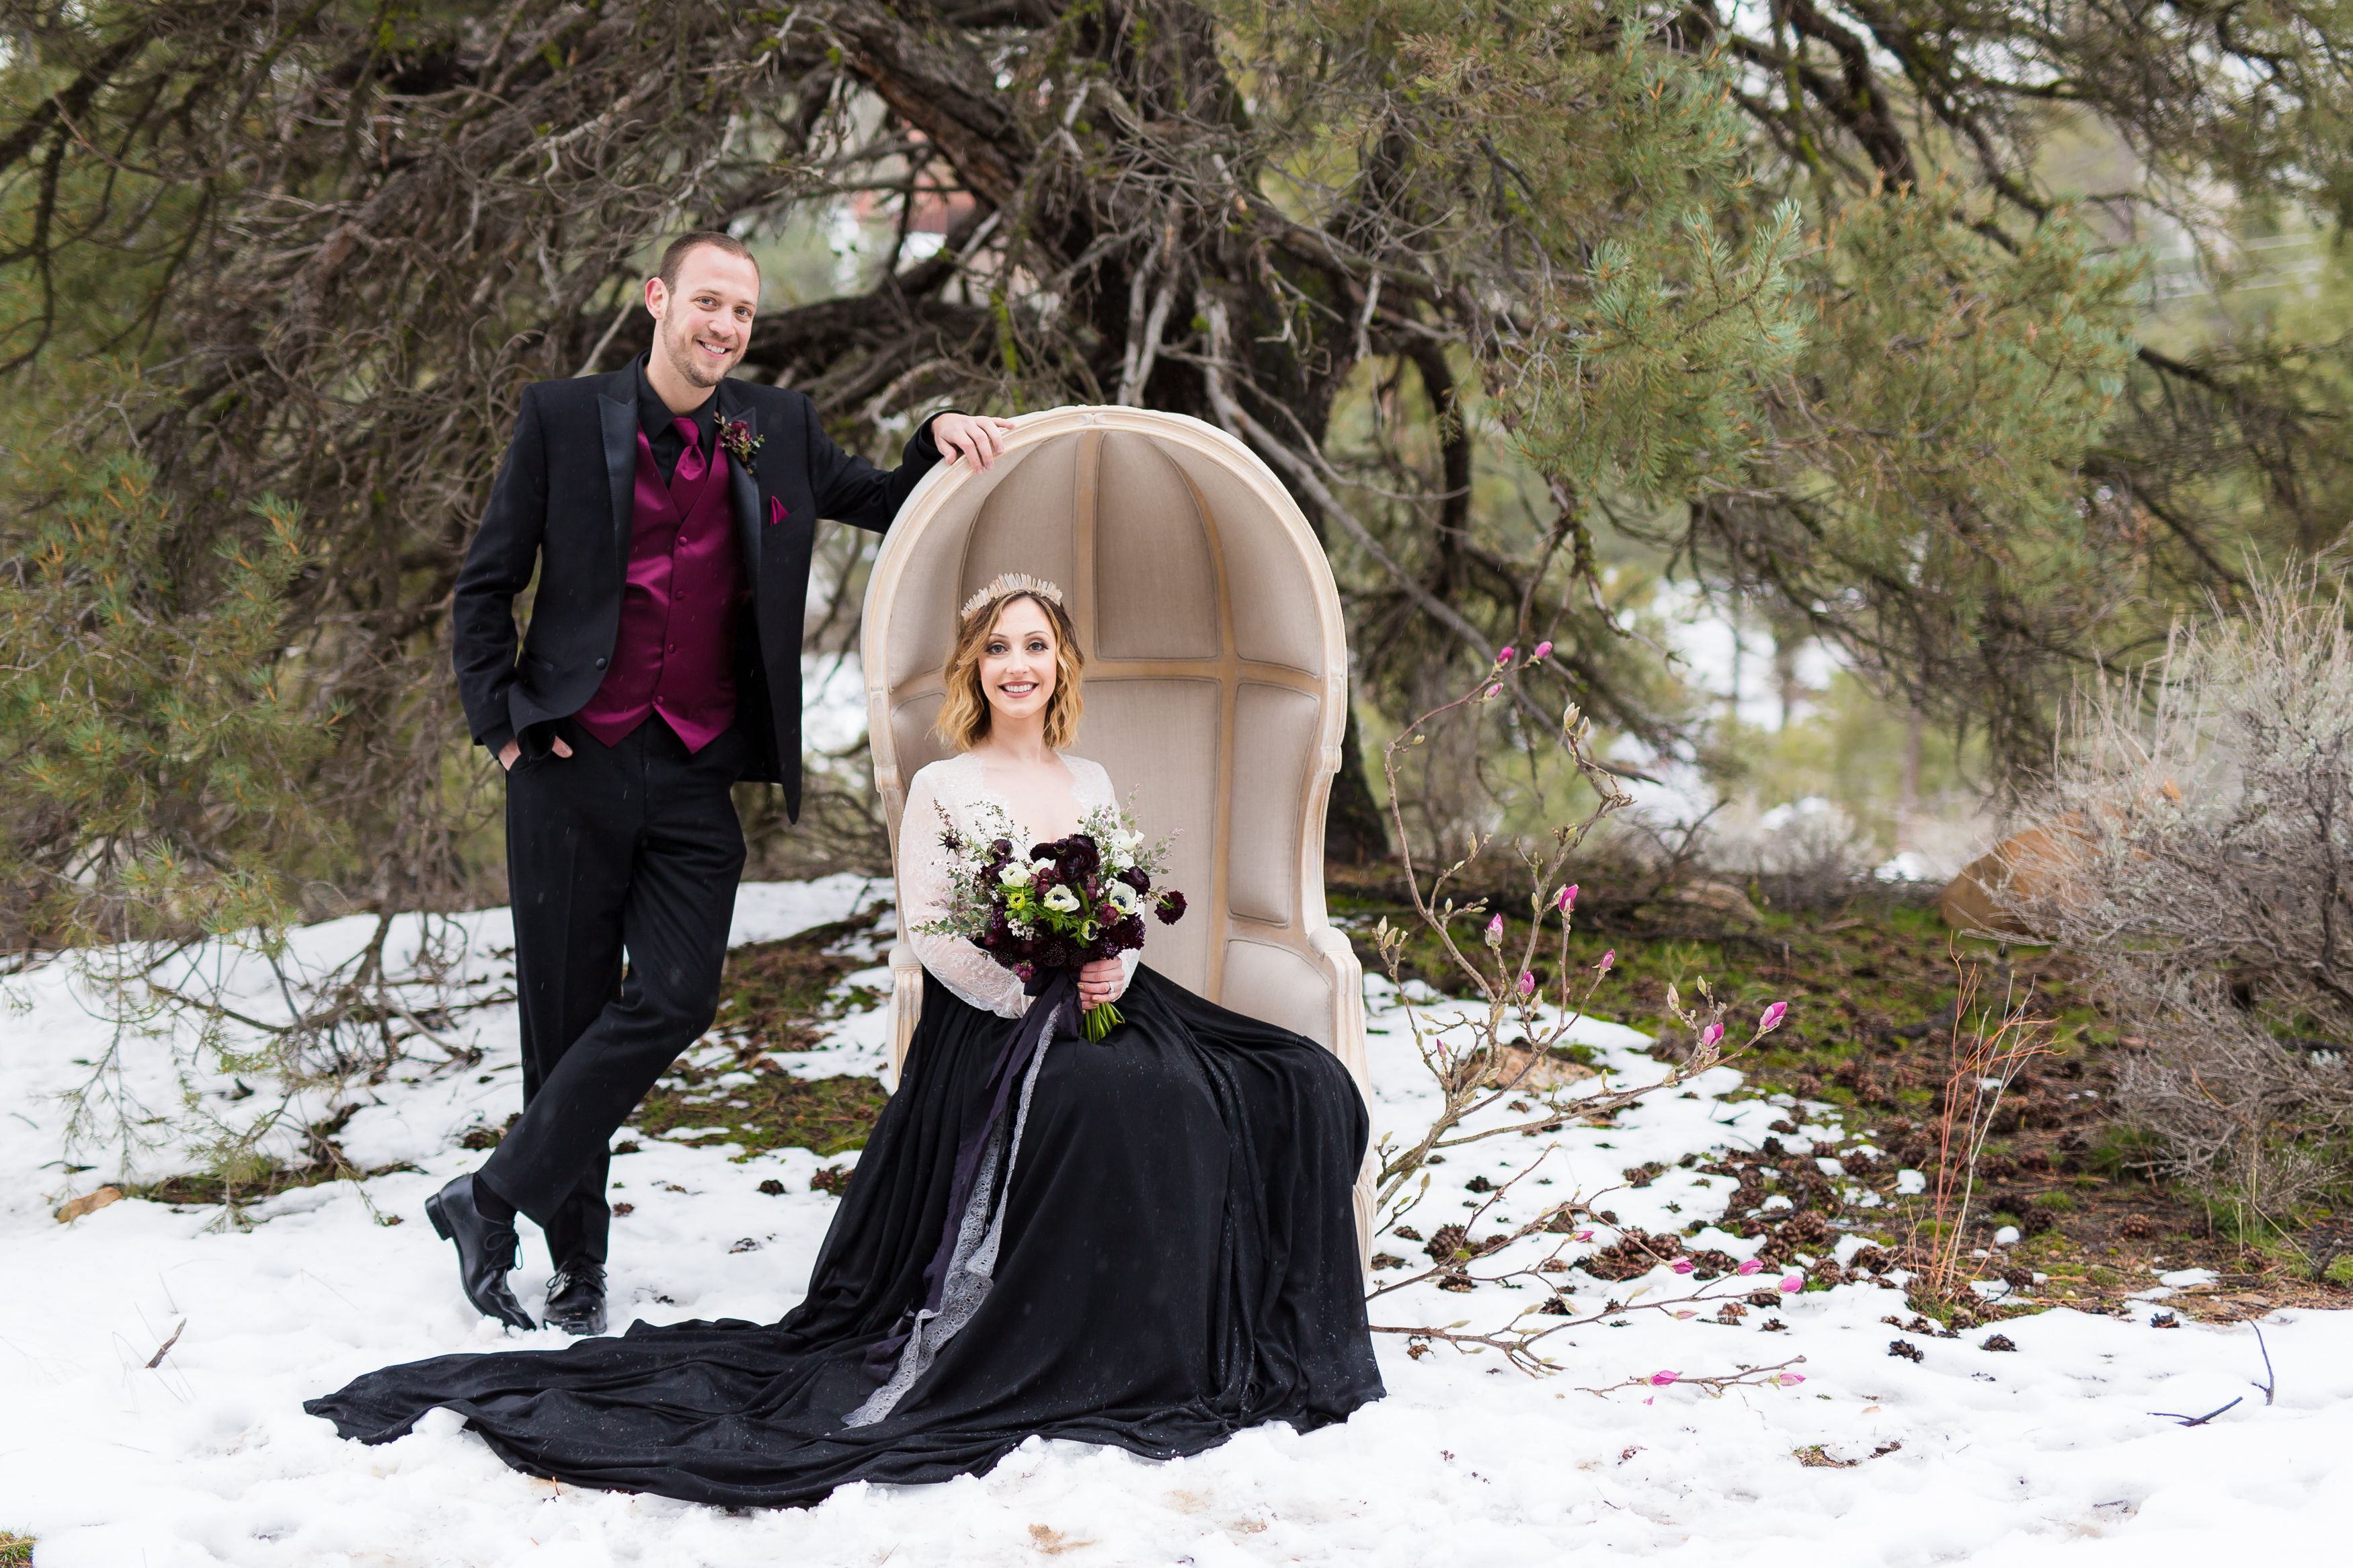 Wedding couple in snow in Frazier Park, CA, photographed by Stefani Ciotti